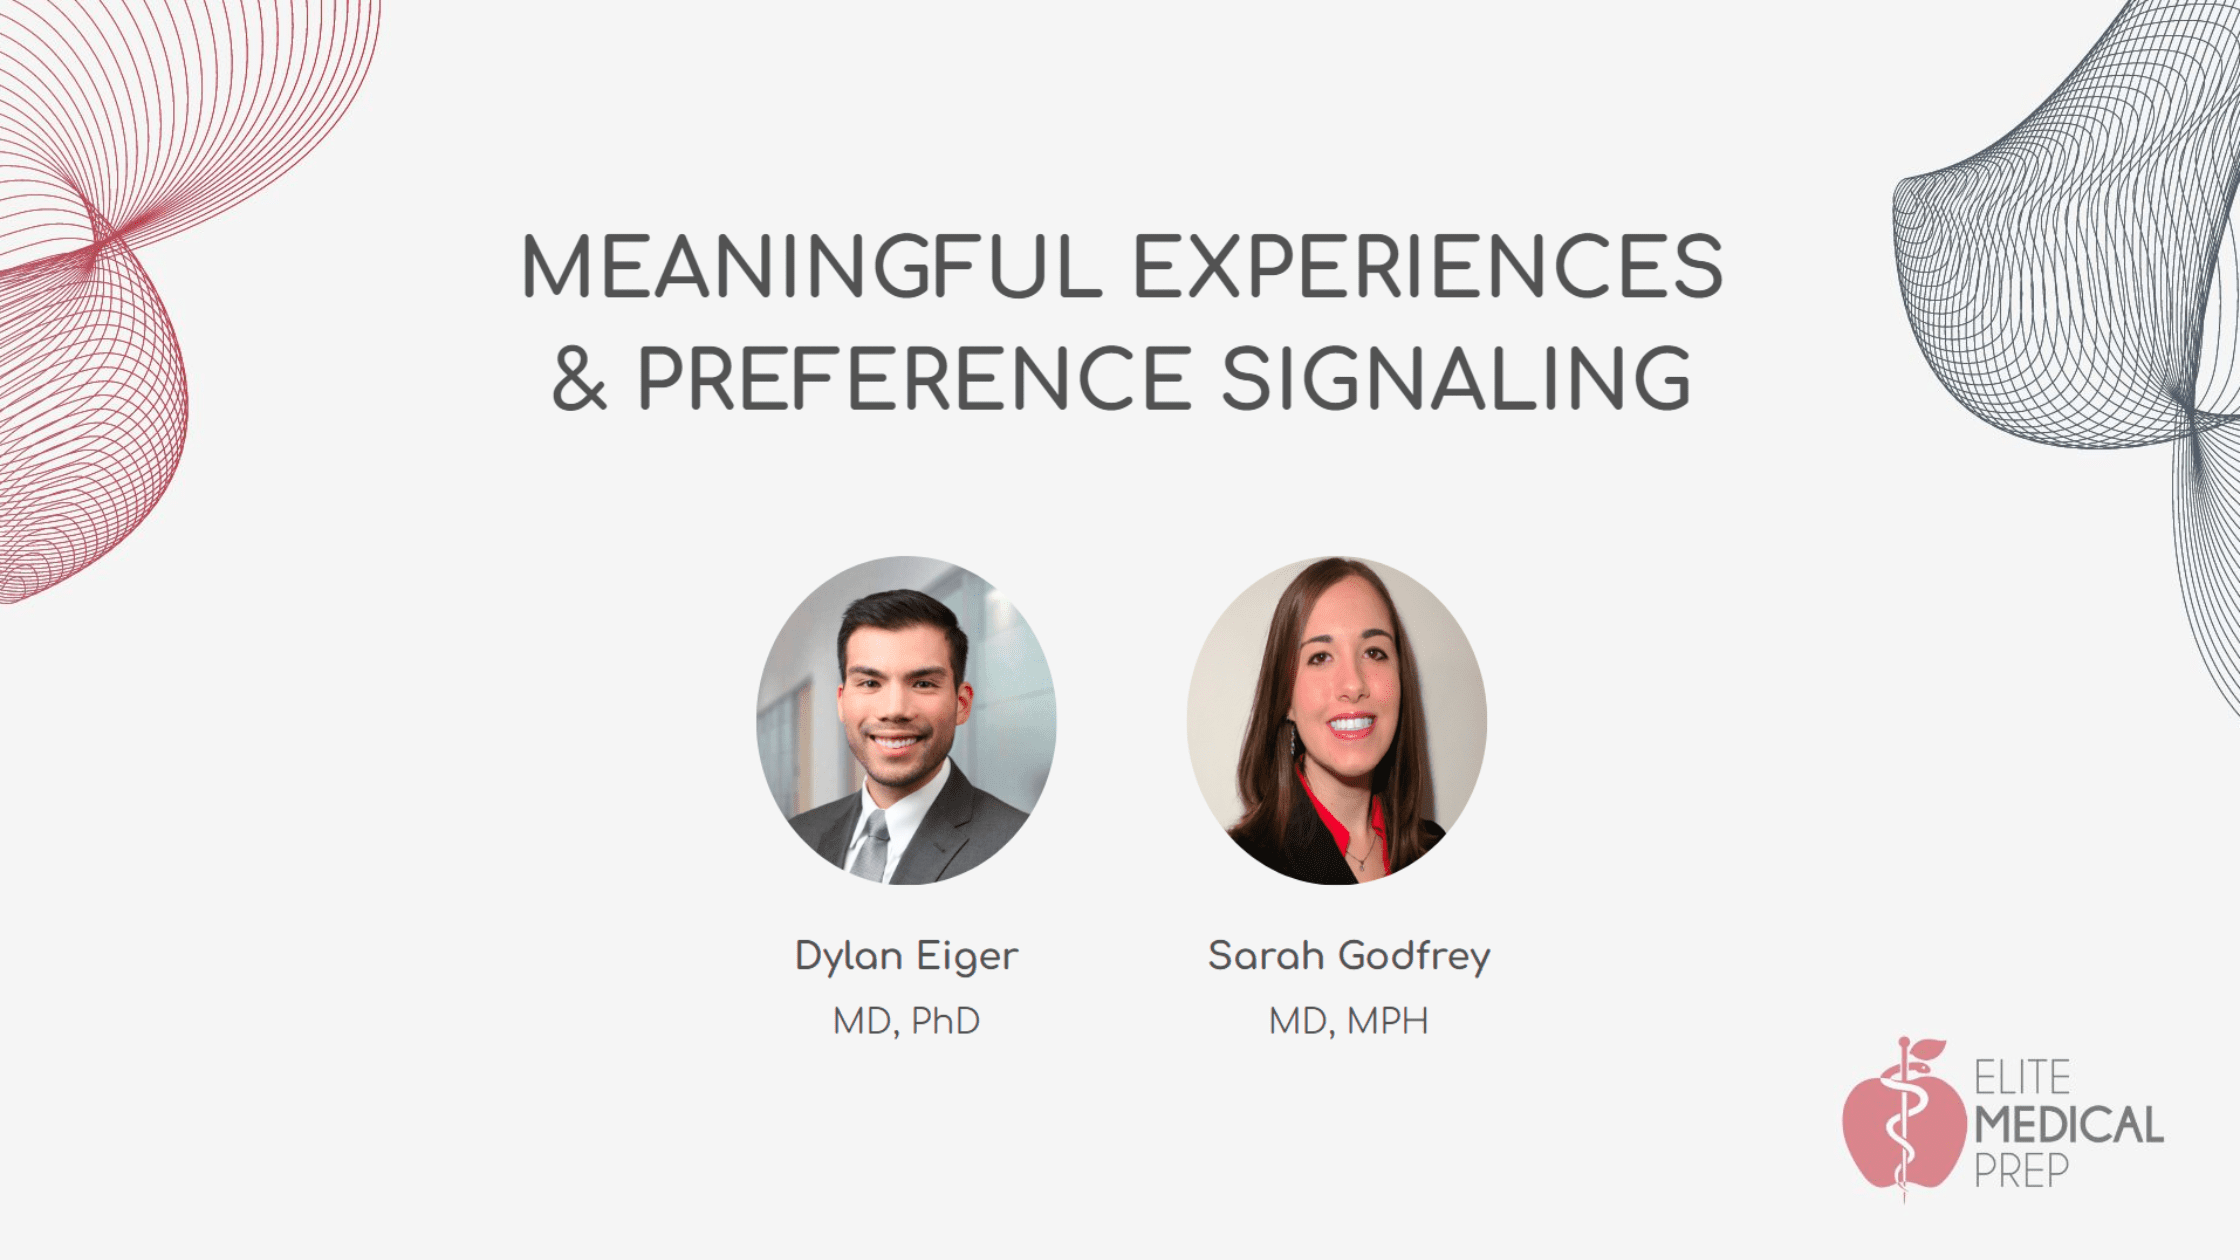 Elite Medical Prep's residency roundtable event "Meaningful Experiences and Preference Signaling" opening slide introducing the speakers.